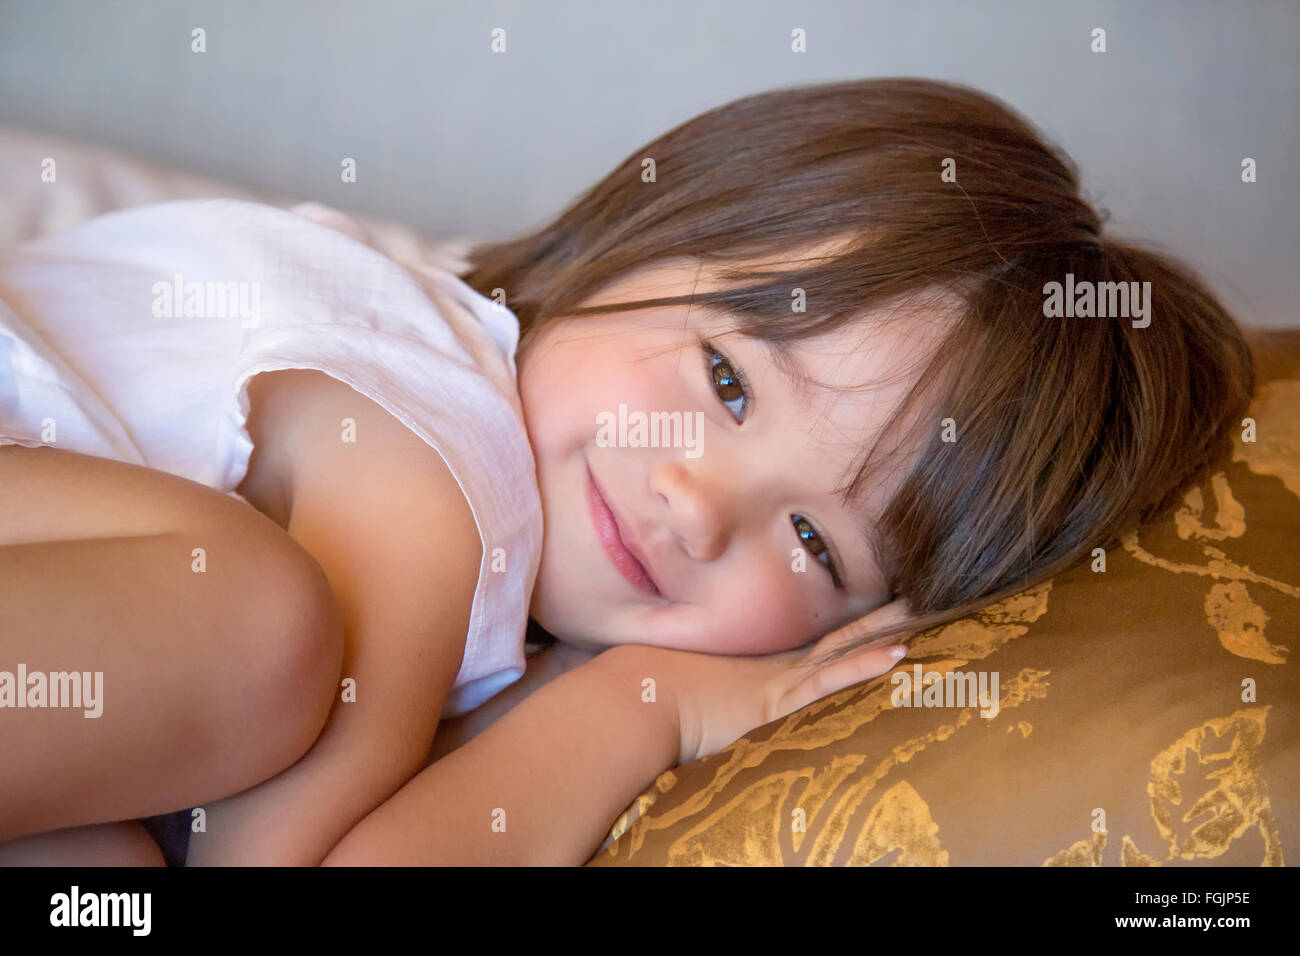 Three year old girl resting on the bed Stock Photo